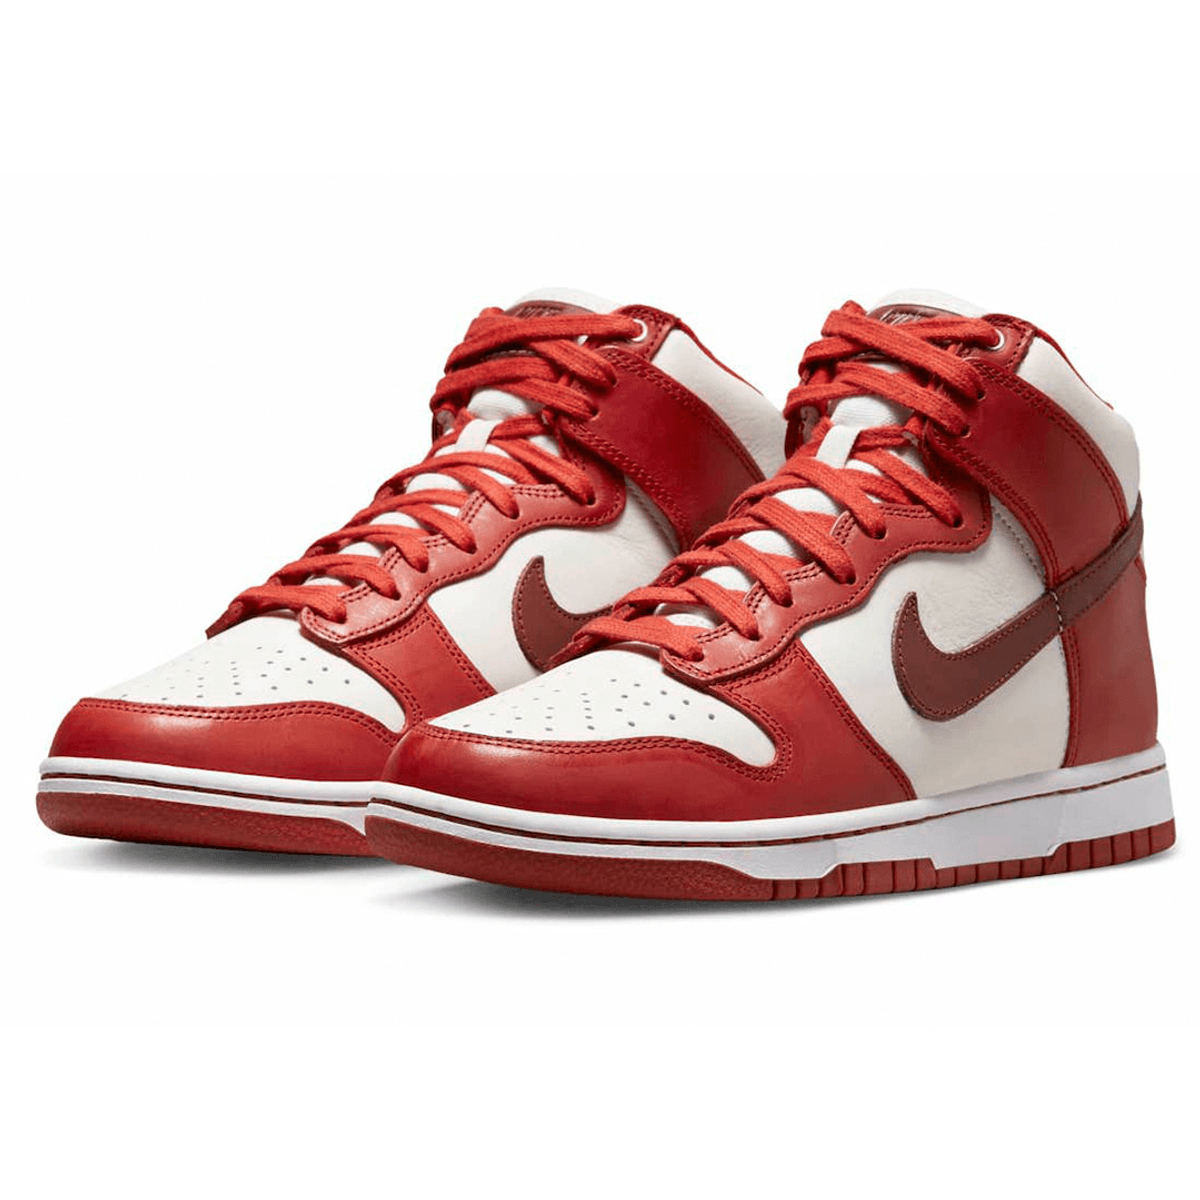 Fall Is Here And Nike Is Getting Into The Spirit With The WMNS Nike Dunk High LXX Cinnabar